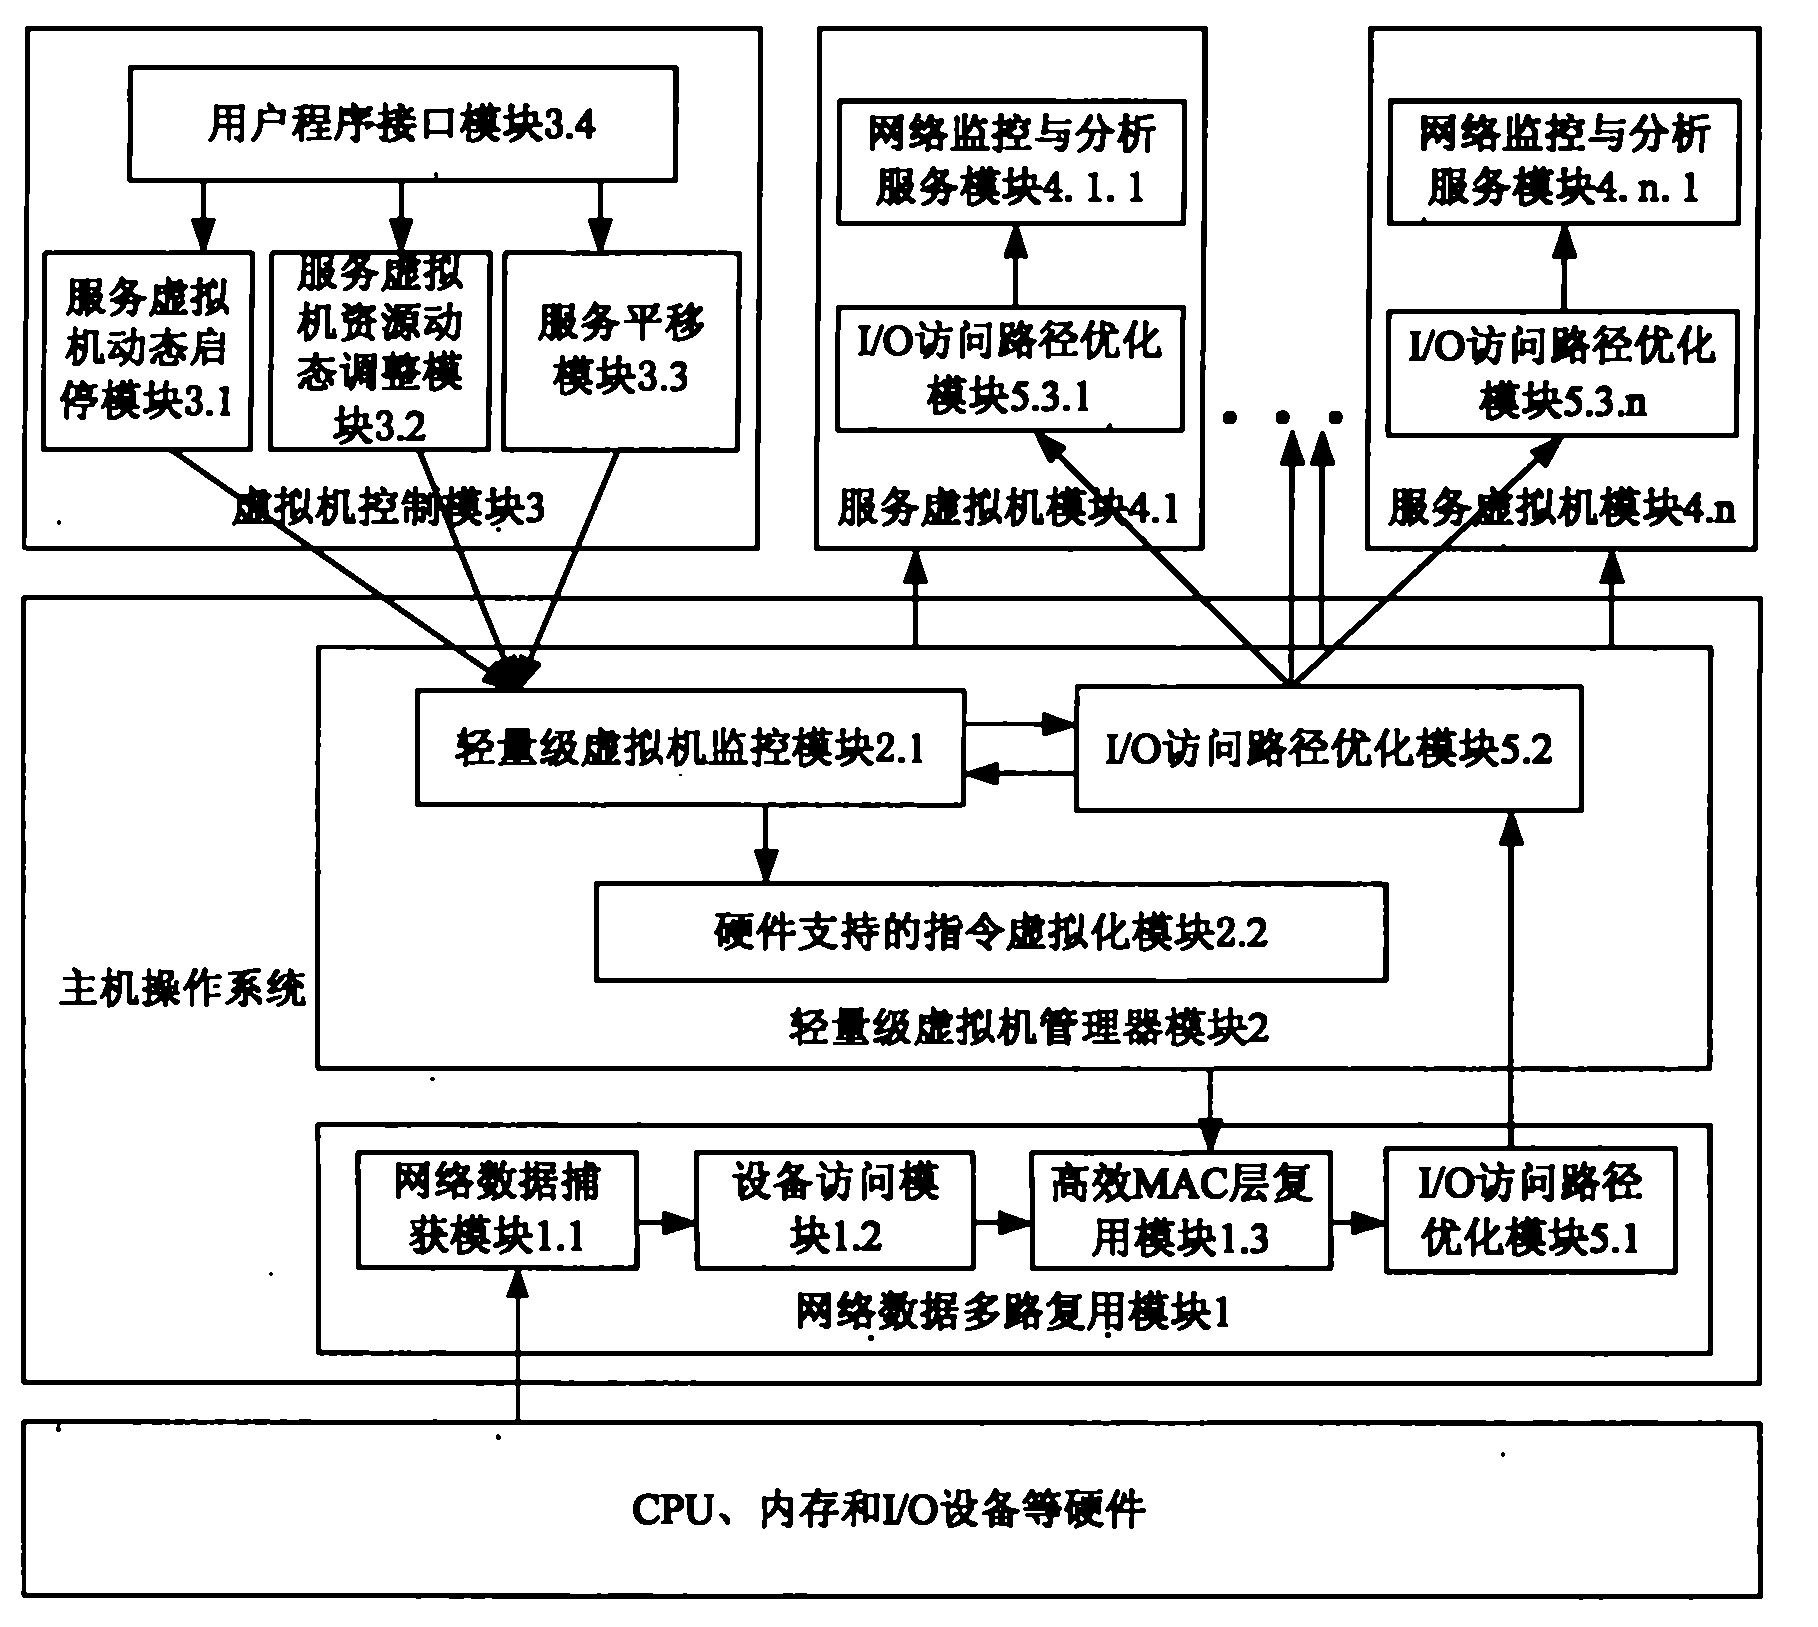 Network monitoring and analysis system under virtual machine circumstance